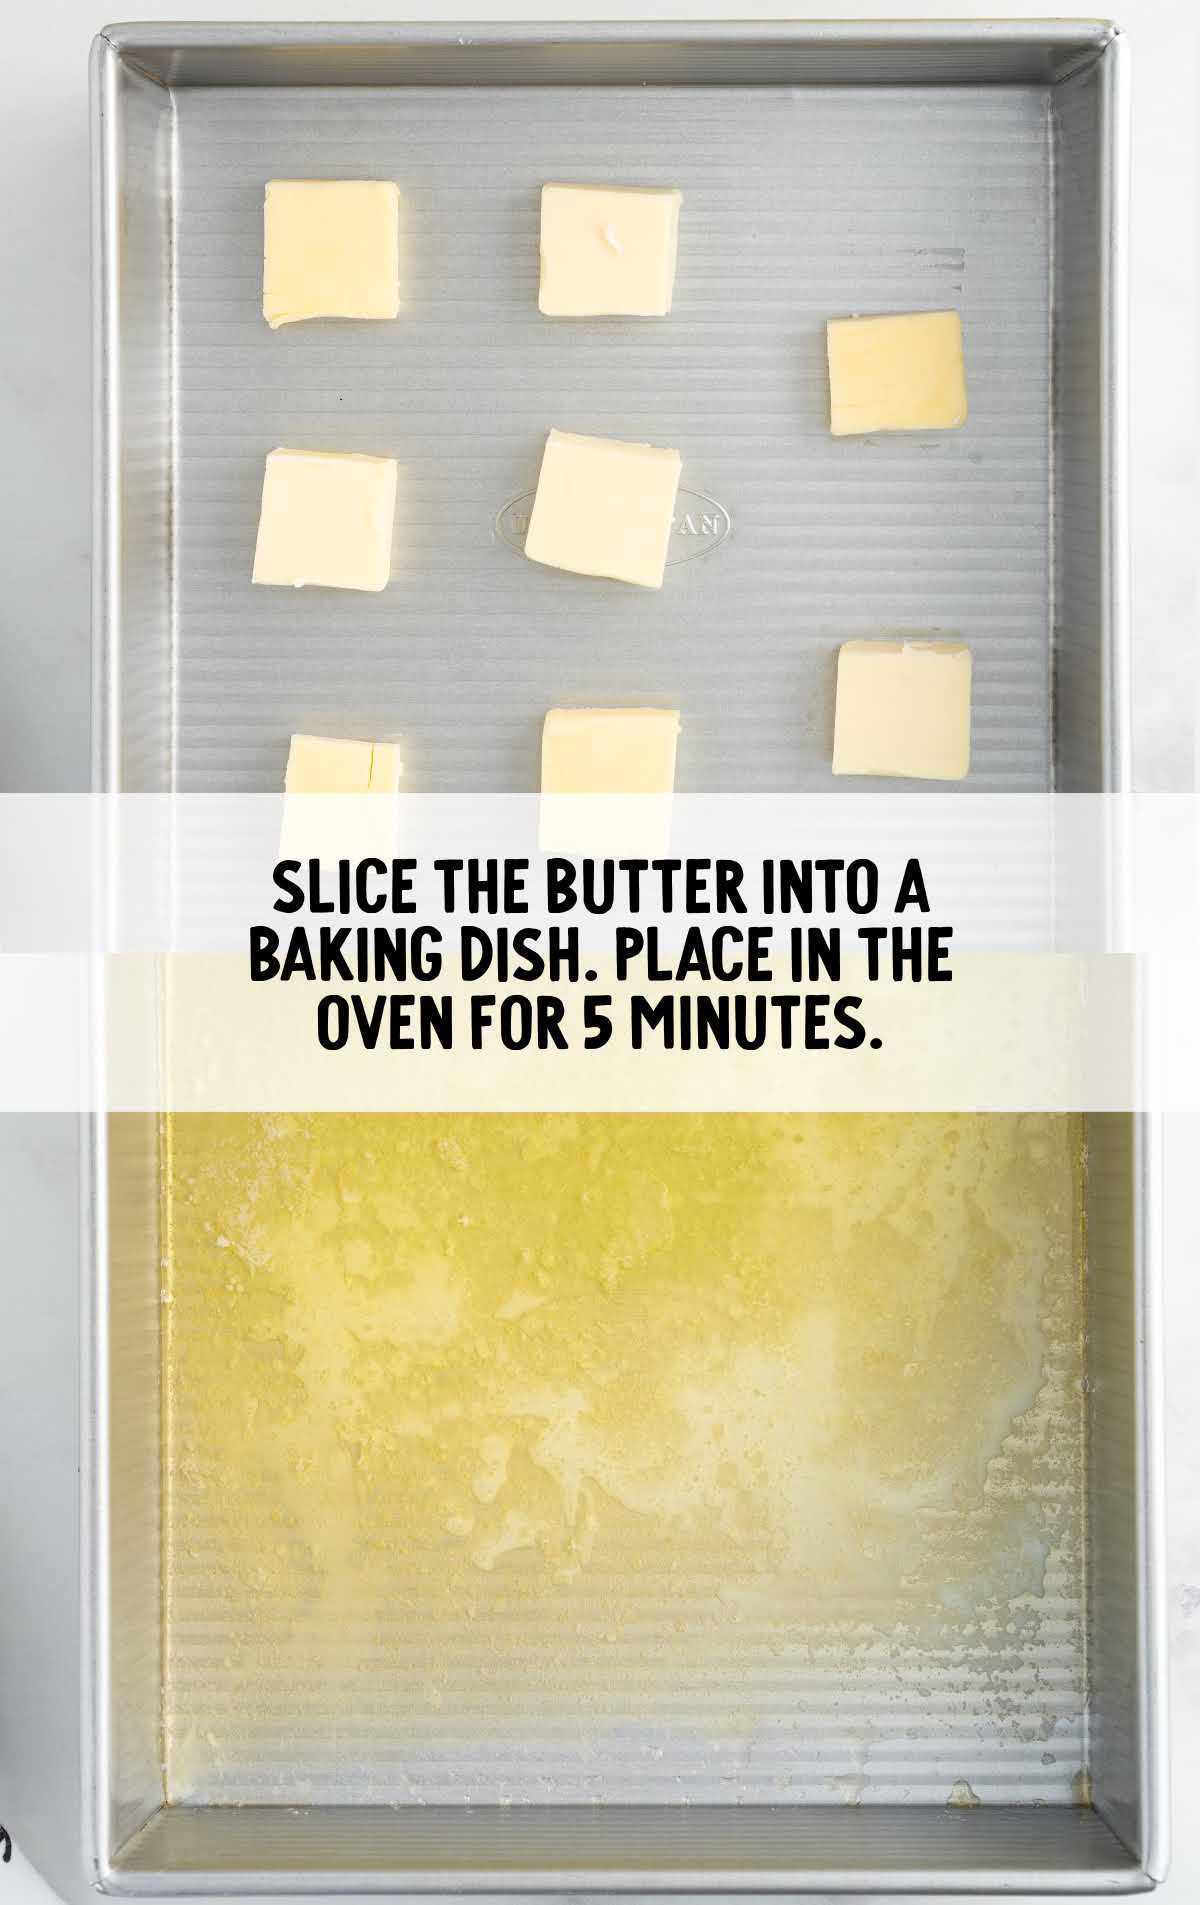 pieces of sliced butter in a baking dish and then melted butter in a baking dish